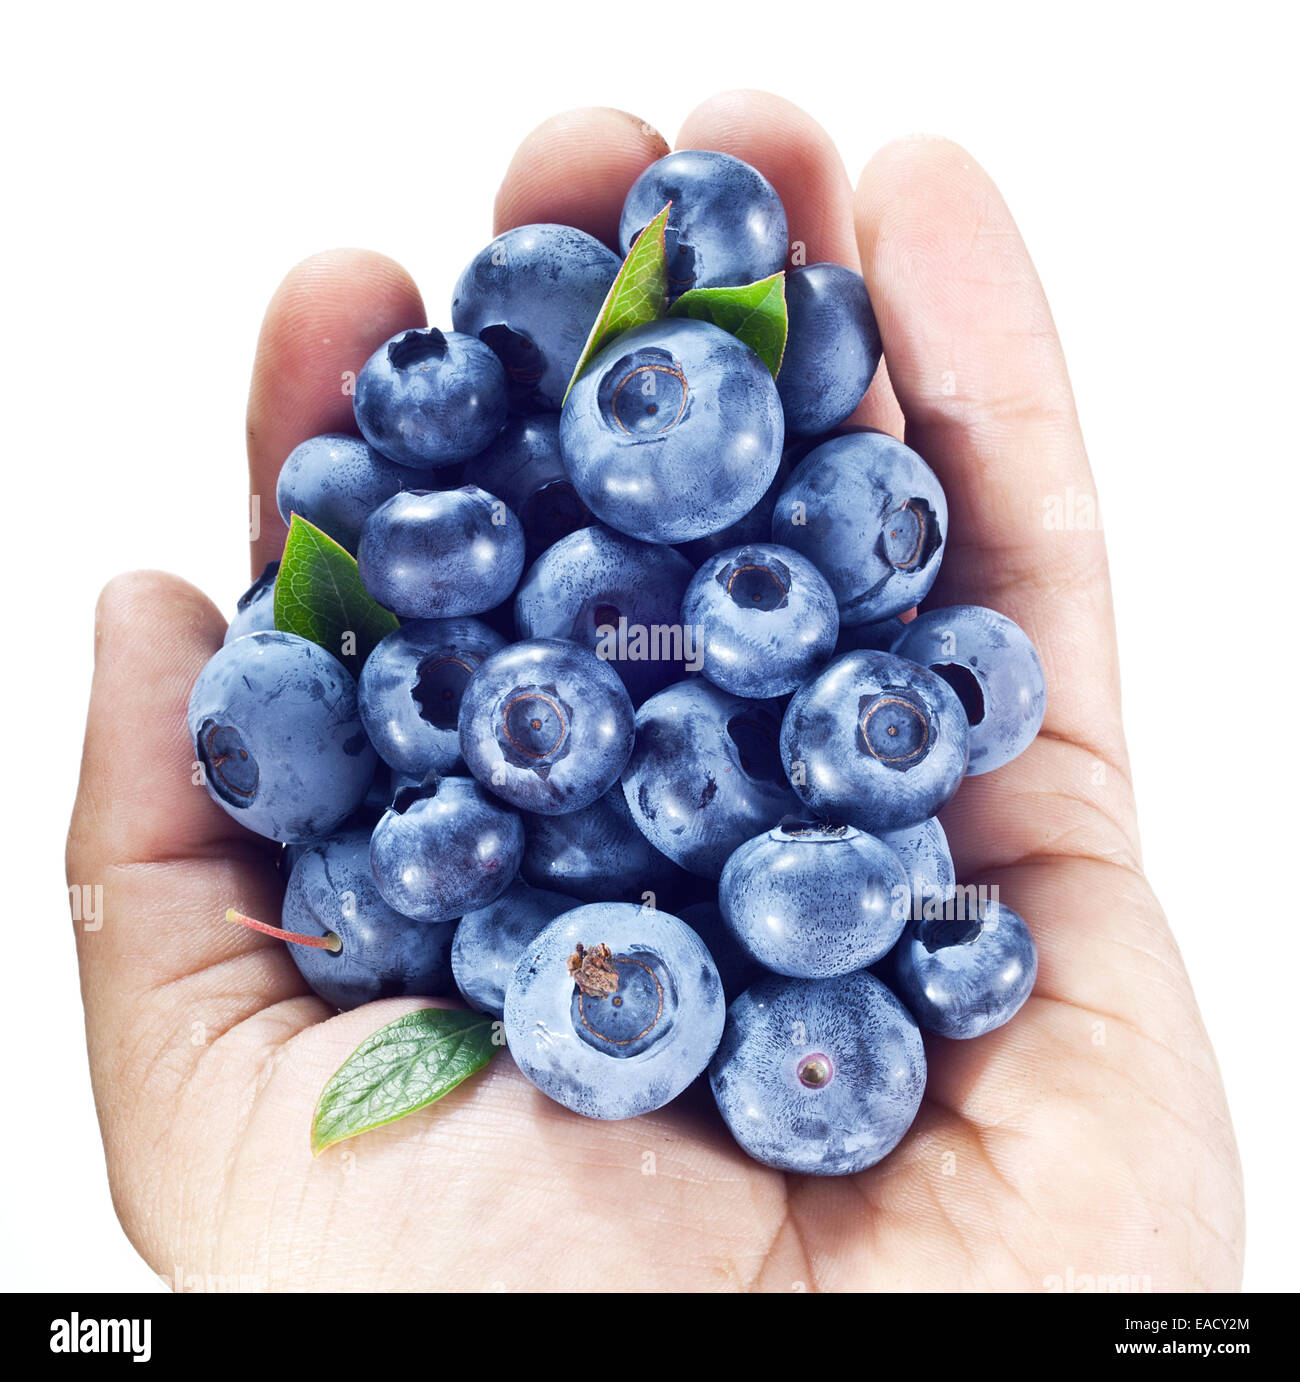 Blueberries in the man's hand over white. Stock Photo